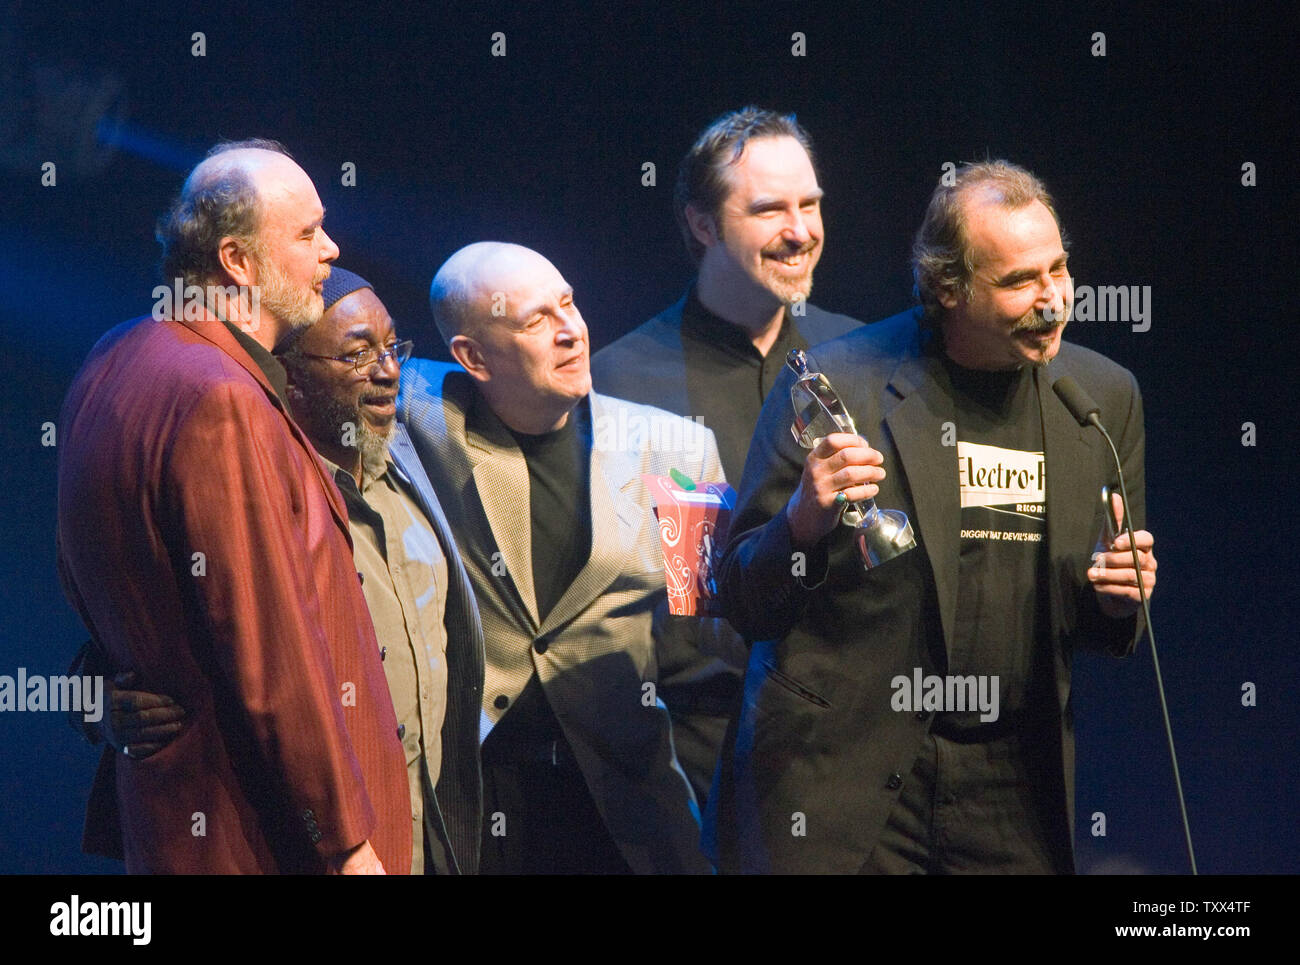 Members of the band Fathead celebrate winning the Blues Album of the Year of the Year Award during the Juno Gala Banquet & Awards at the Telus Convention Center in Calgary, Alberta during the 2008 JUNO Music Awards, April 5, 2008.    (UPI Photo/Heinz Ruckemann) Stock Photo